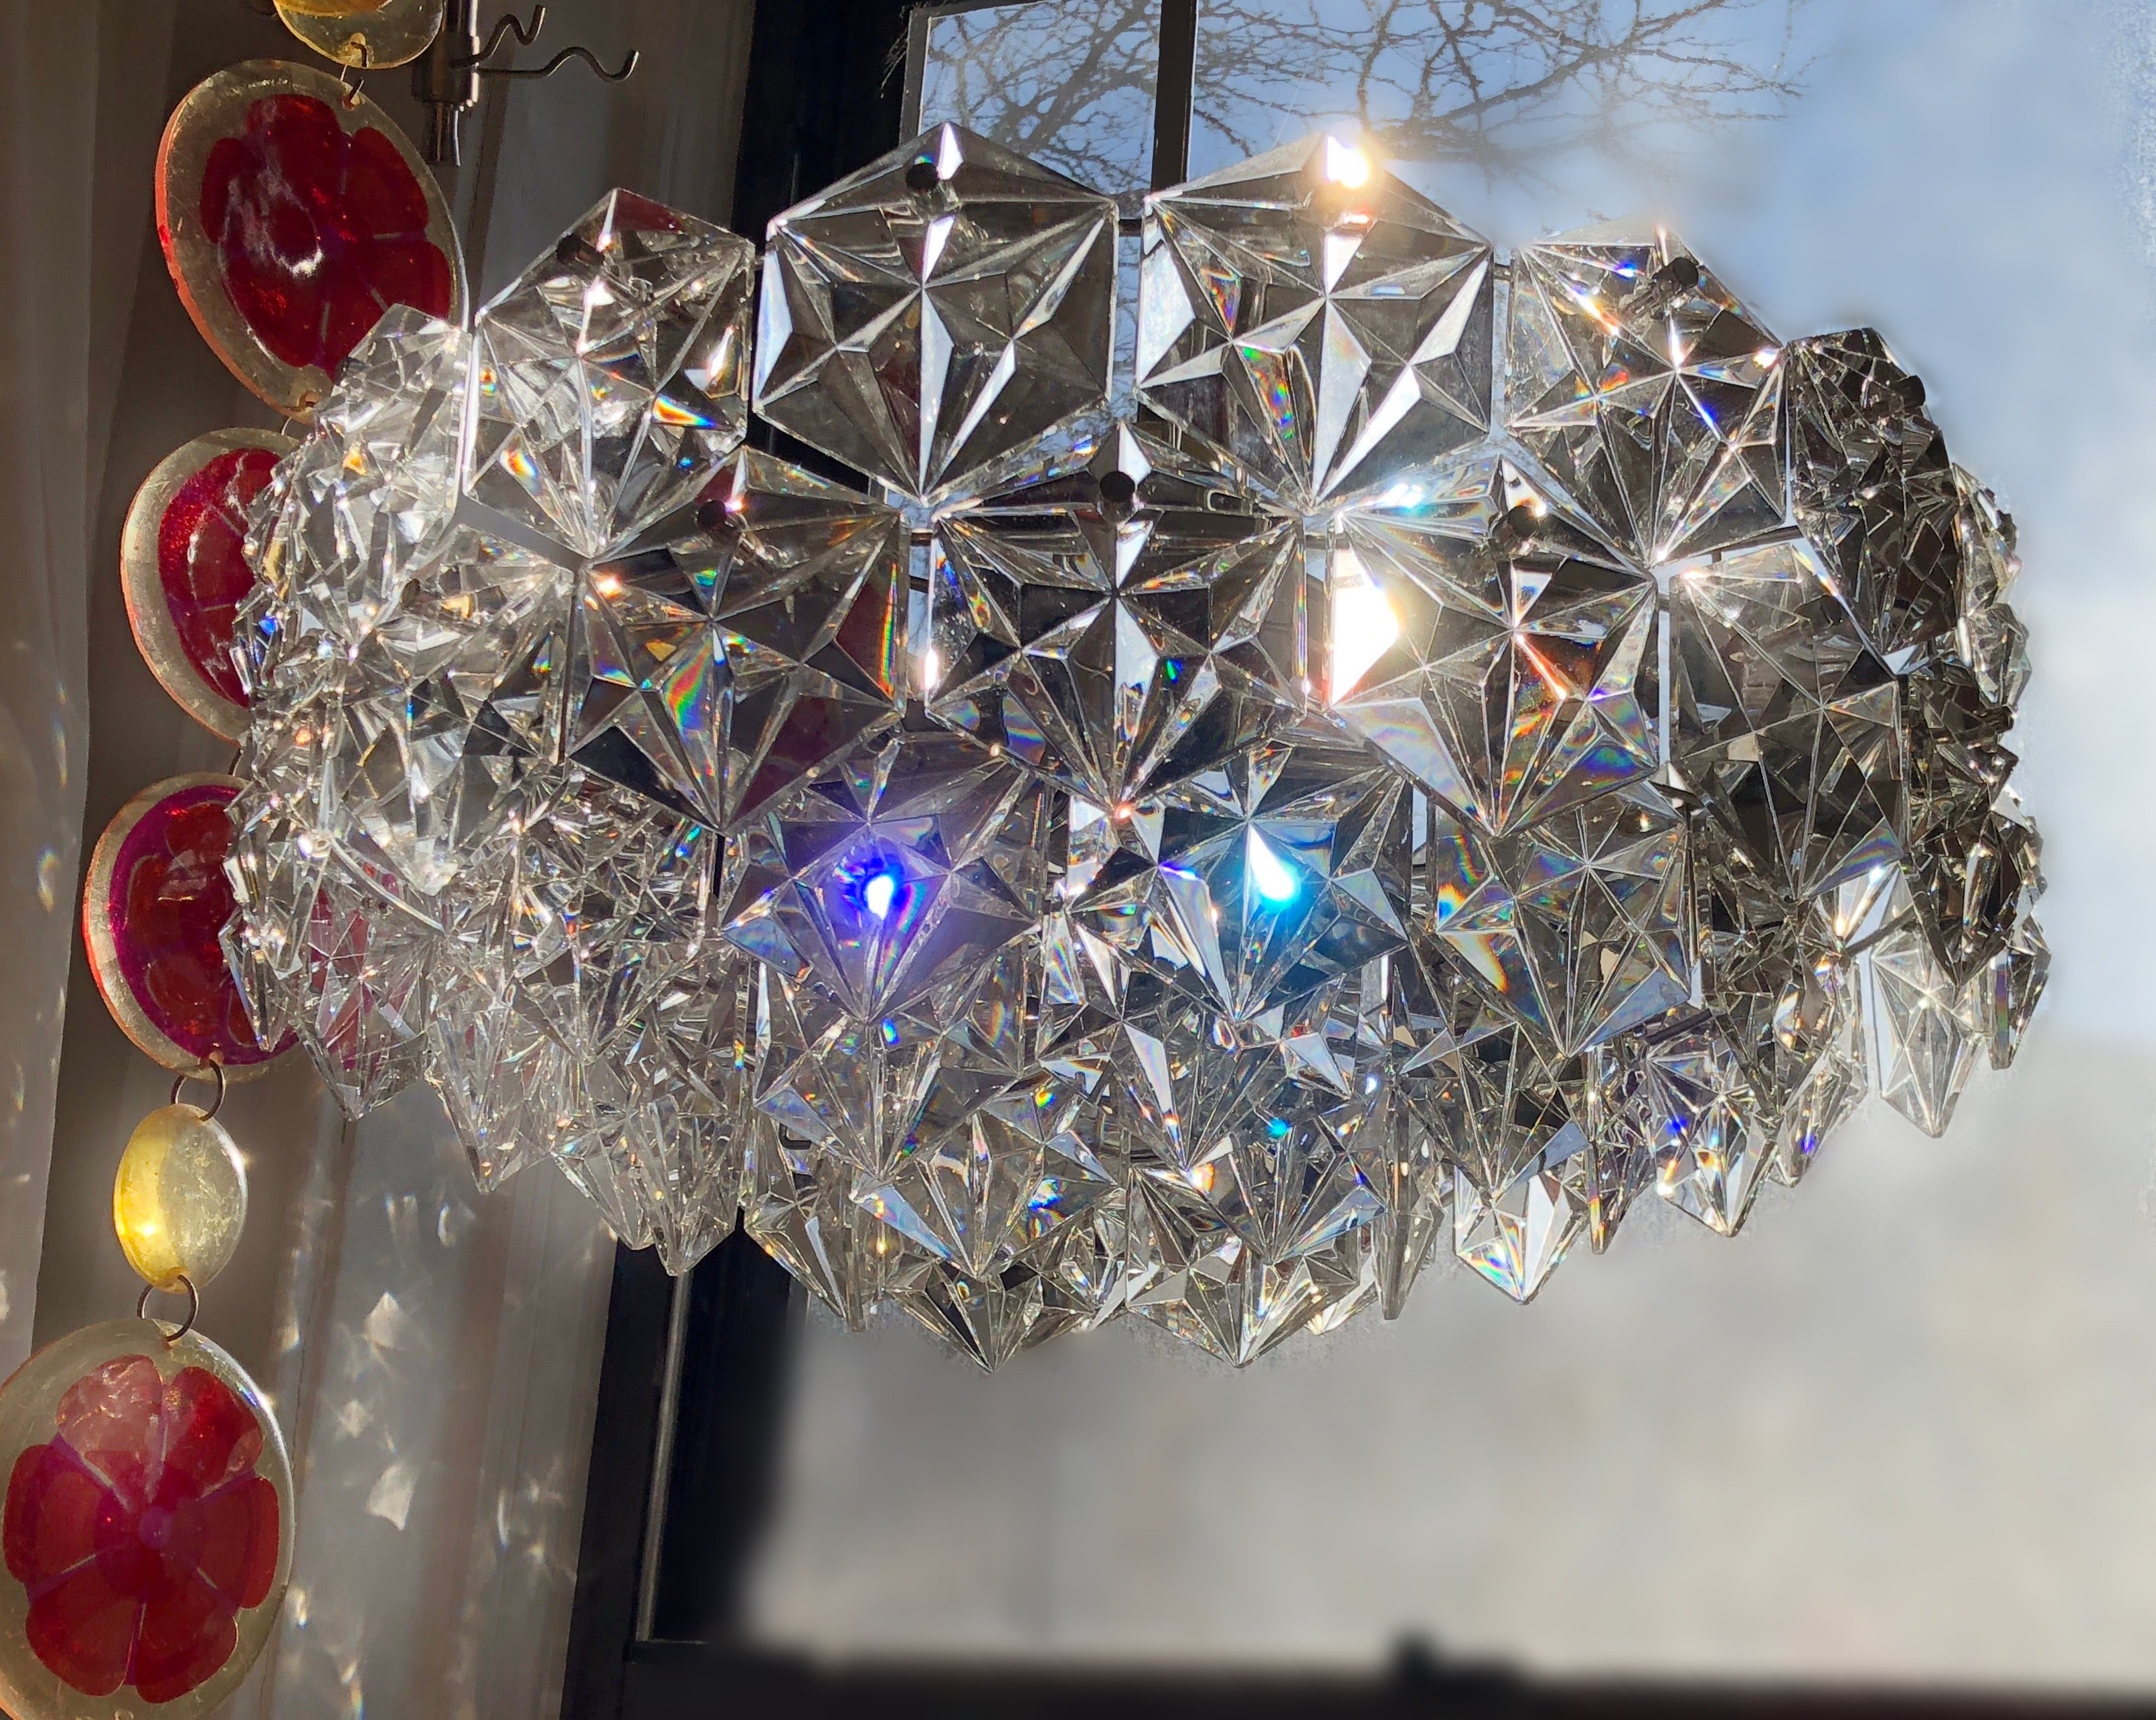 Gorgeous (rare) silver tone example of the iconic faceted crystal chandelier design by Kinkeldey Germany, circa 1965. The aesthetic is elevated to a certain unassuming modernity and understated quality. Stunning.
Good vintage condition. A few flea